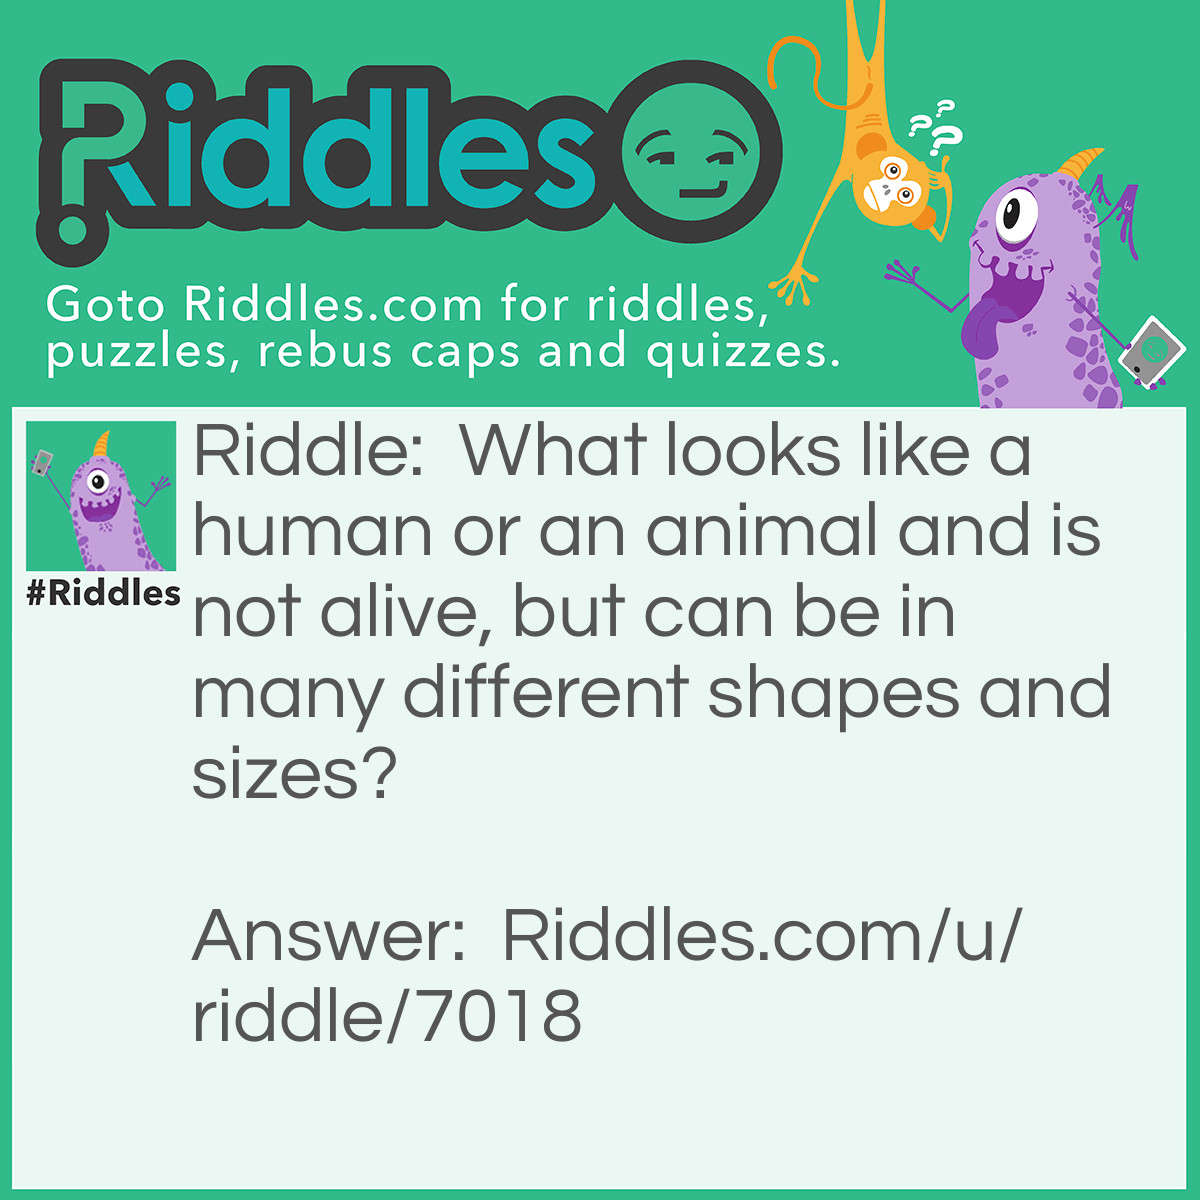 Riddle: What looks like a human or an animal and is not alive, but can be in many different shapes and sizes? Answer: A sculpture.